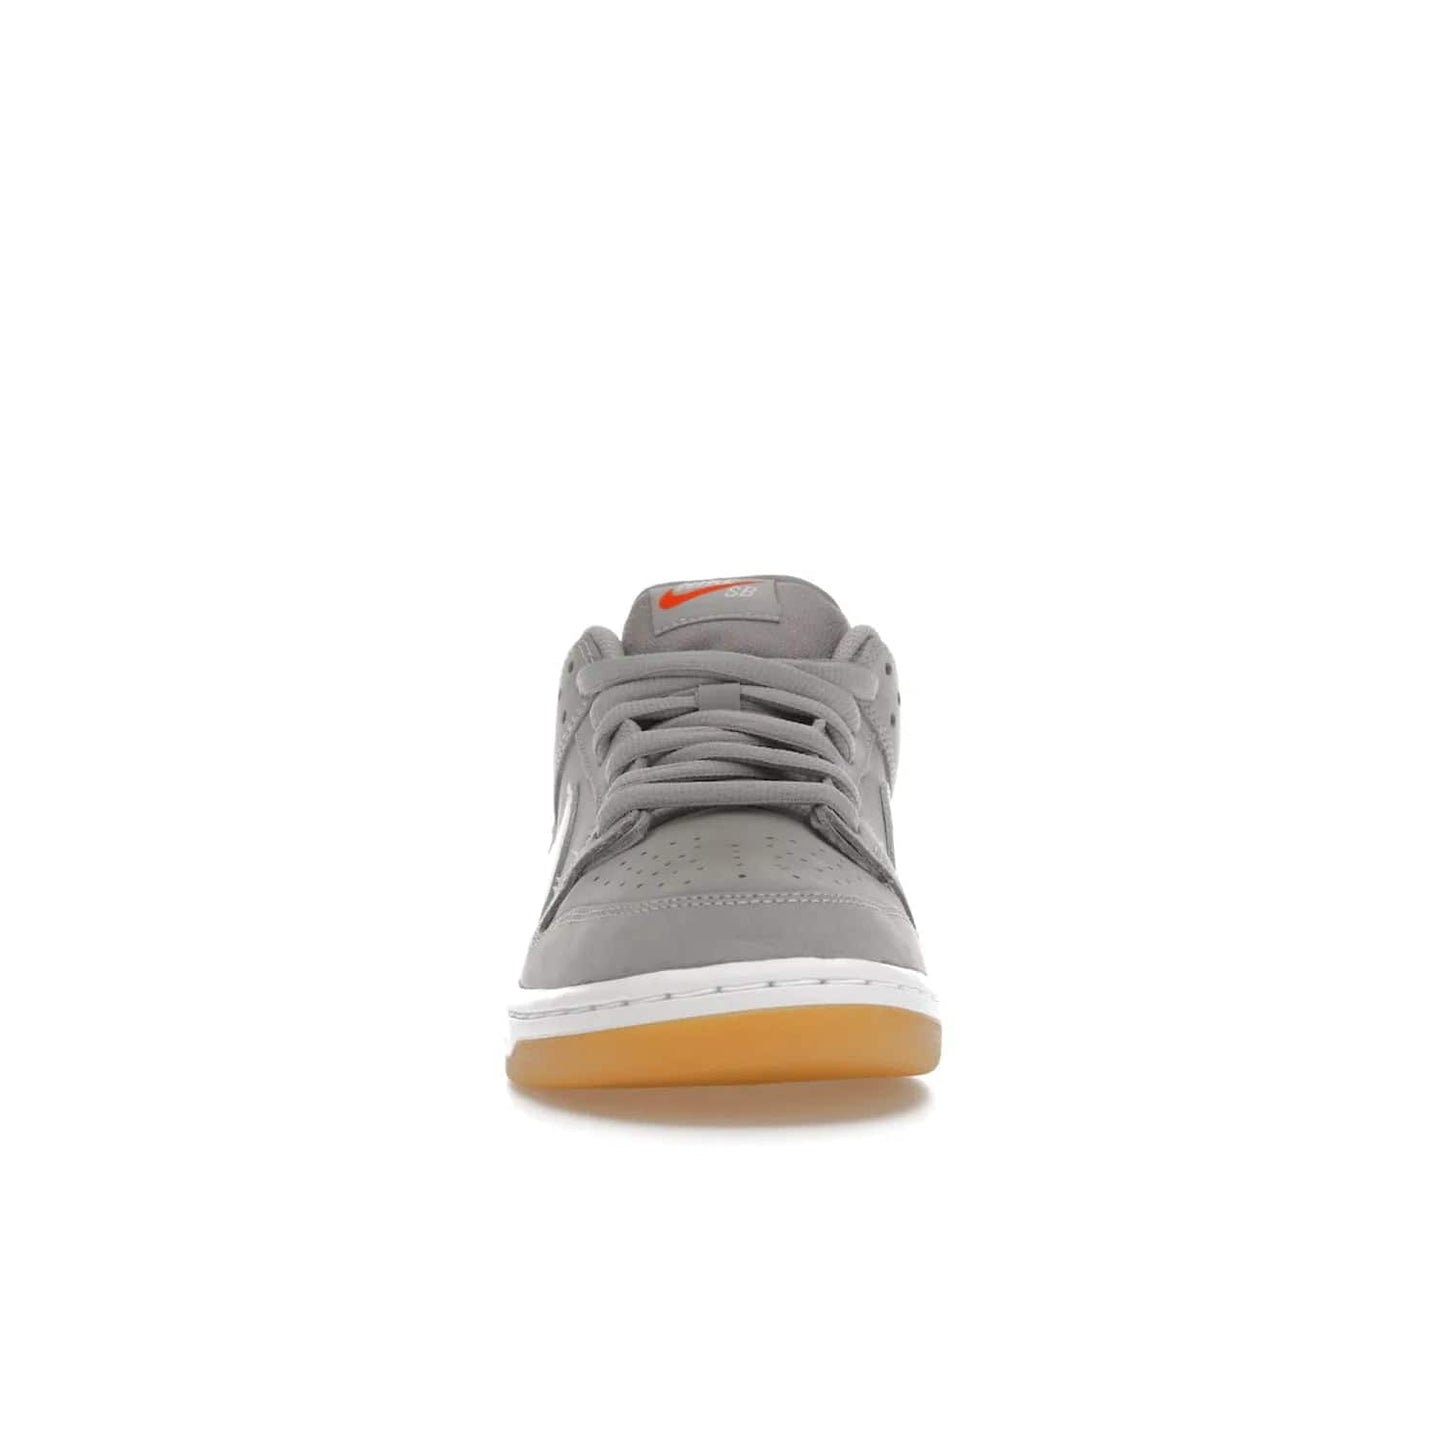 Nike SB Dunk Low Pro ISO Orange Label Wolf Grey Gum - Image 10 - Only at www.BallersClubKickz.com - Introducing Nike's SB Dunk Low Pro ISO Orange Label Wolf Grey Gum - a stylish shoe with a premium Wolf Grey upper, white leather Nike Swoosh, and an eye-catching gum outsole. With special Nike branding and packaging, this shoe adds a unique fashion statement. Out Feb. 24, 2023.